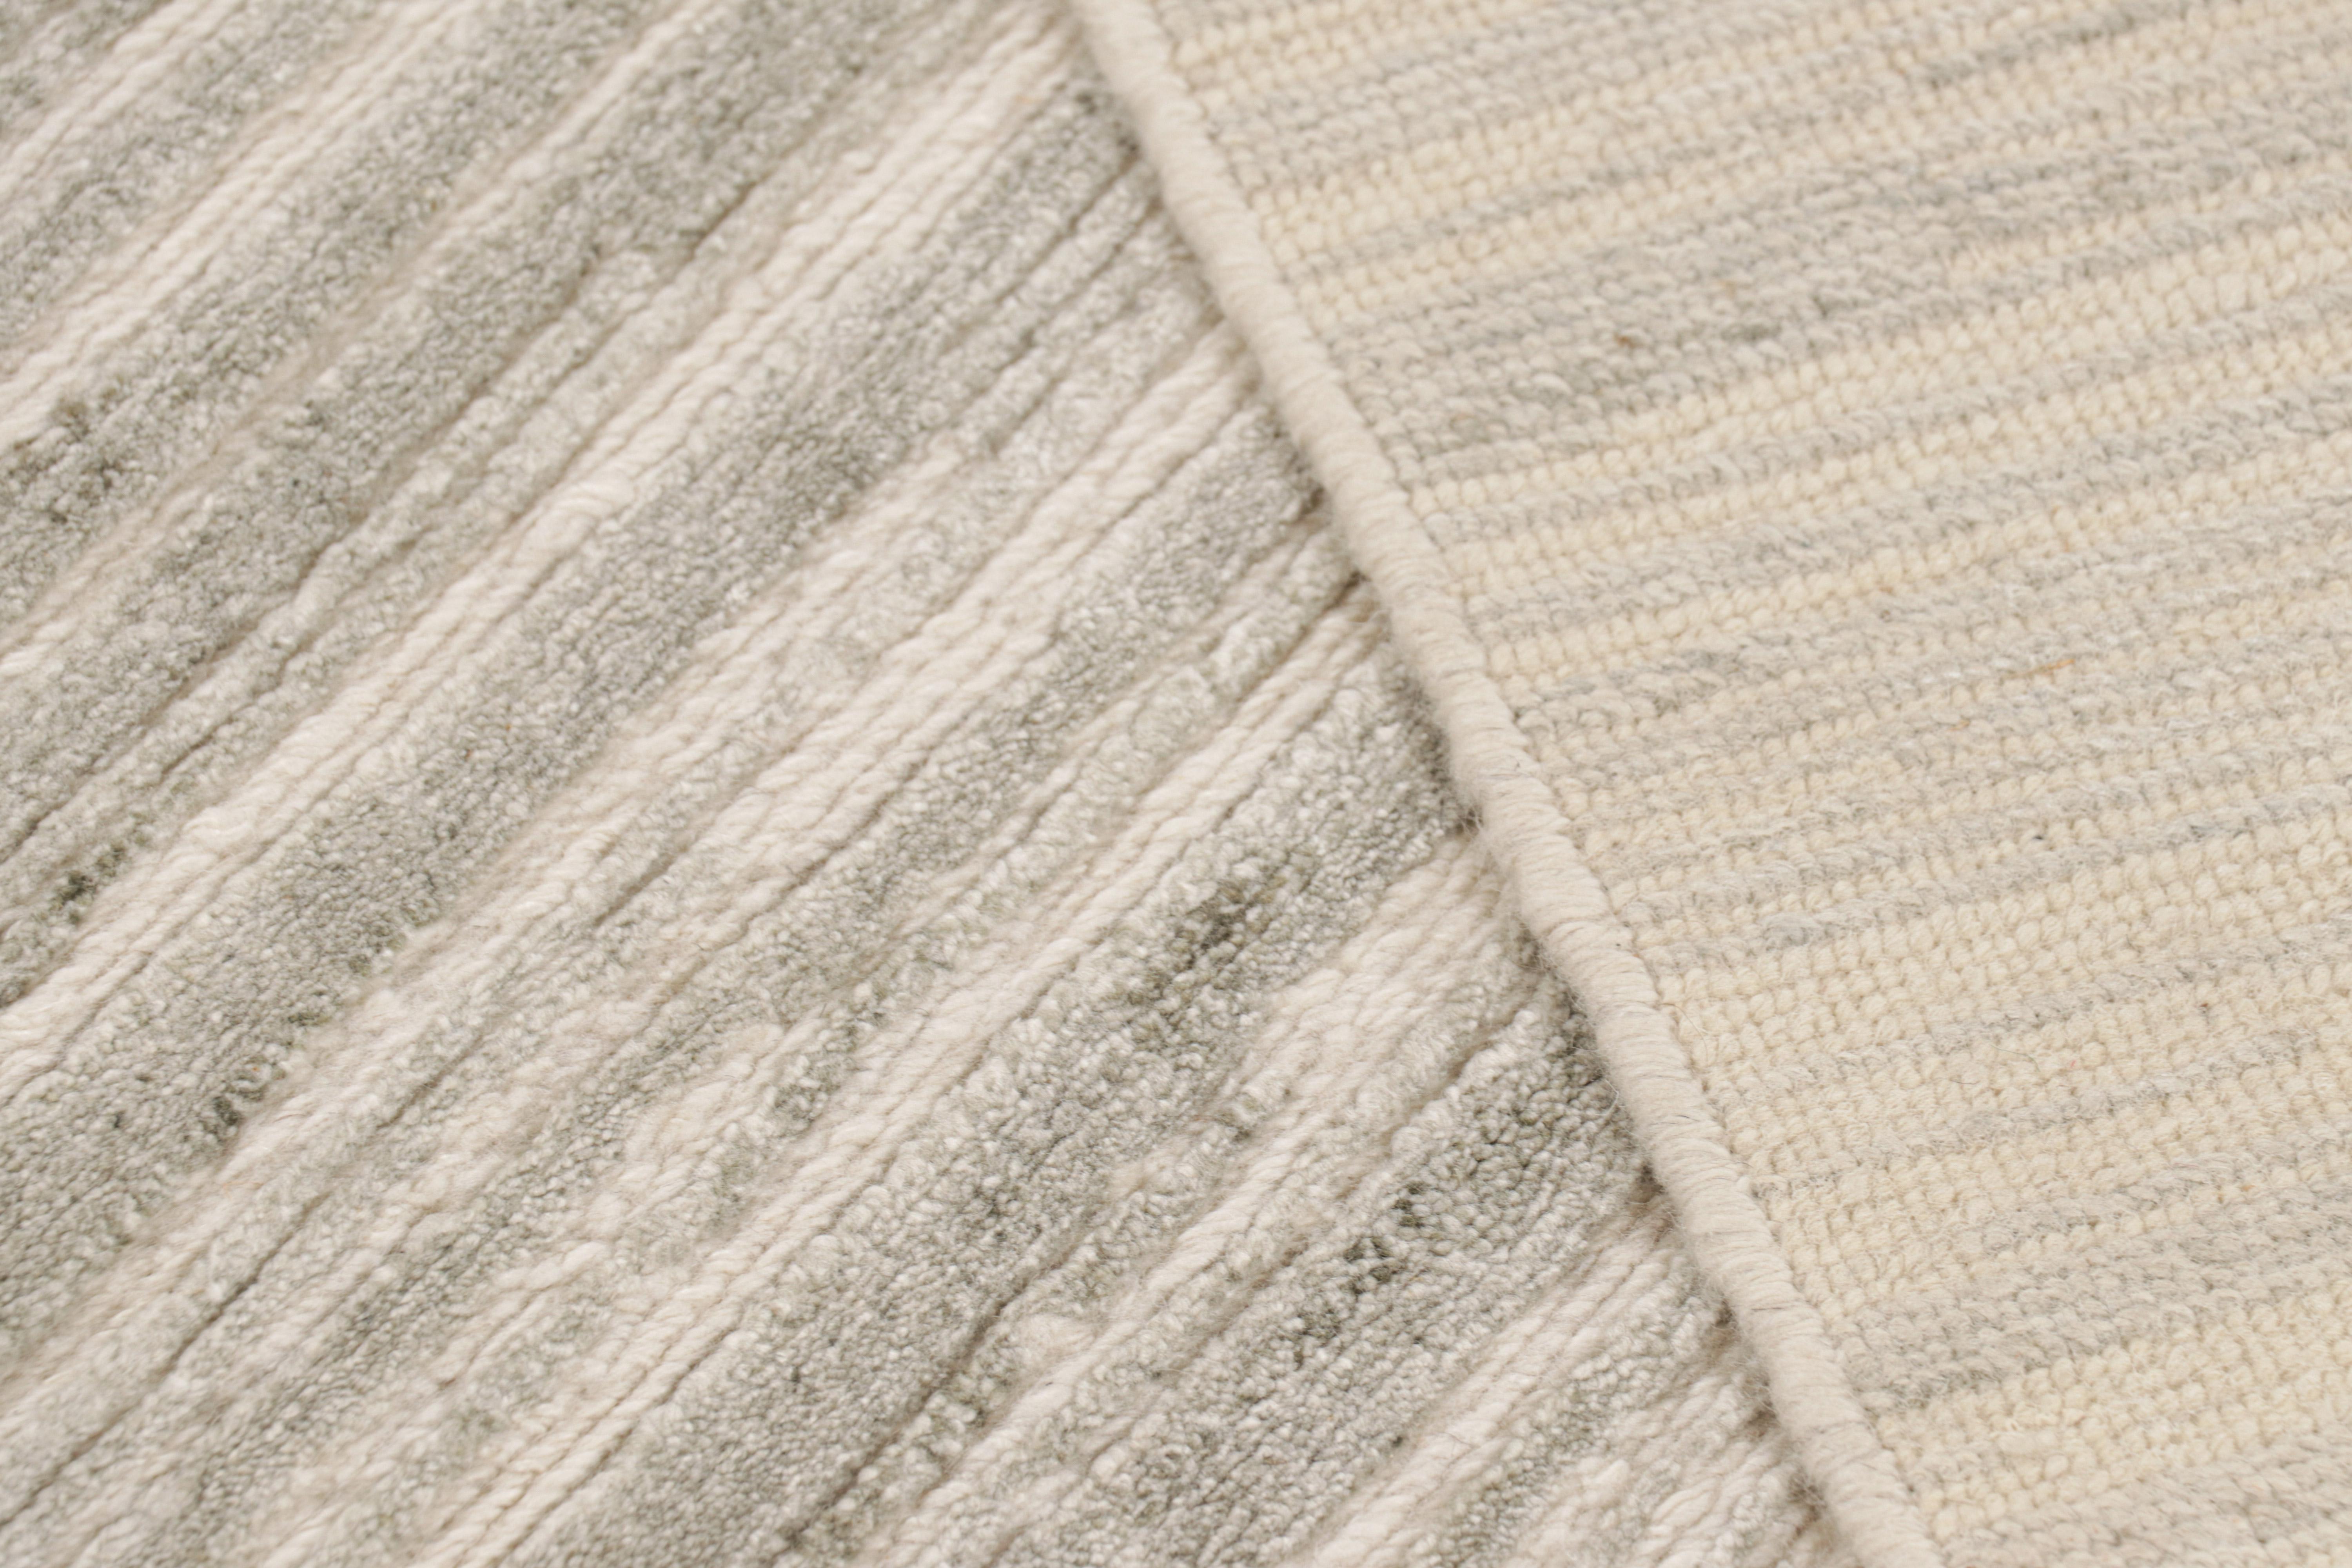 Wool Rug & Kilim’s Textural Rug in White and Cream-Gray Abstract High-Low Stripes For Sale